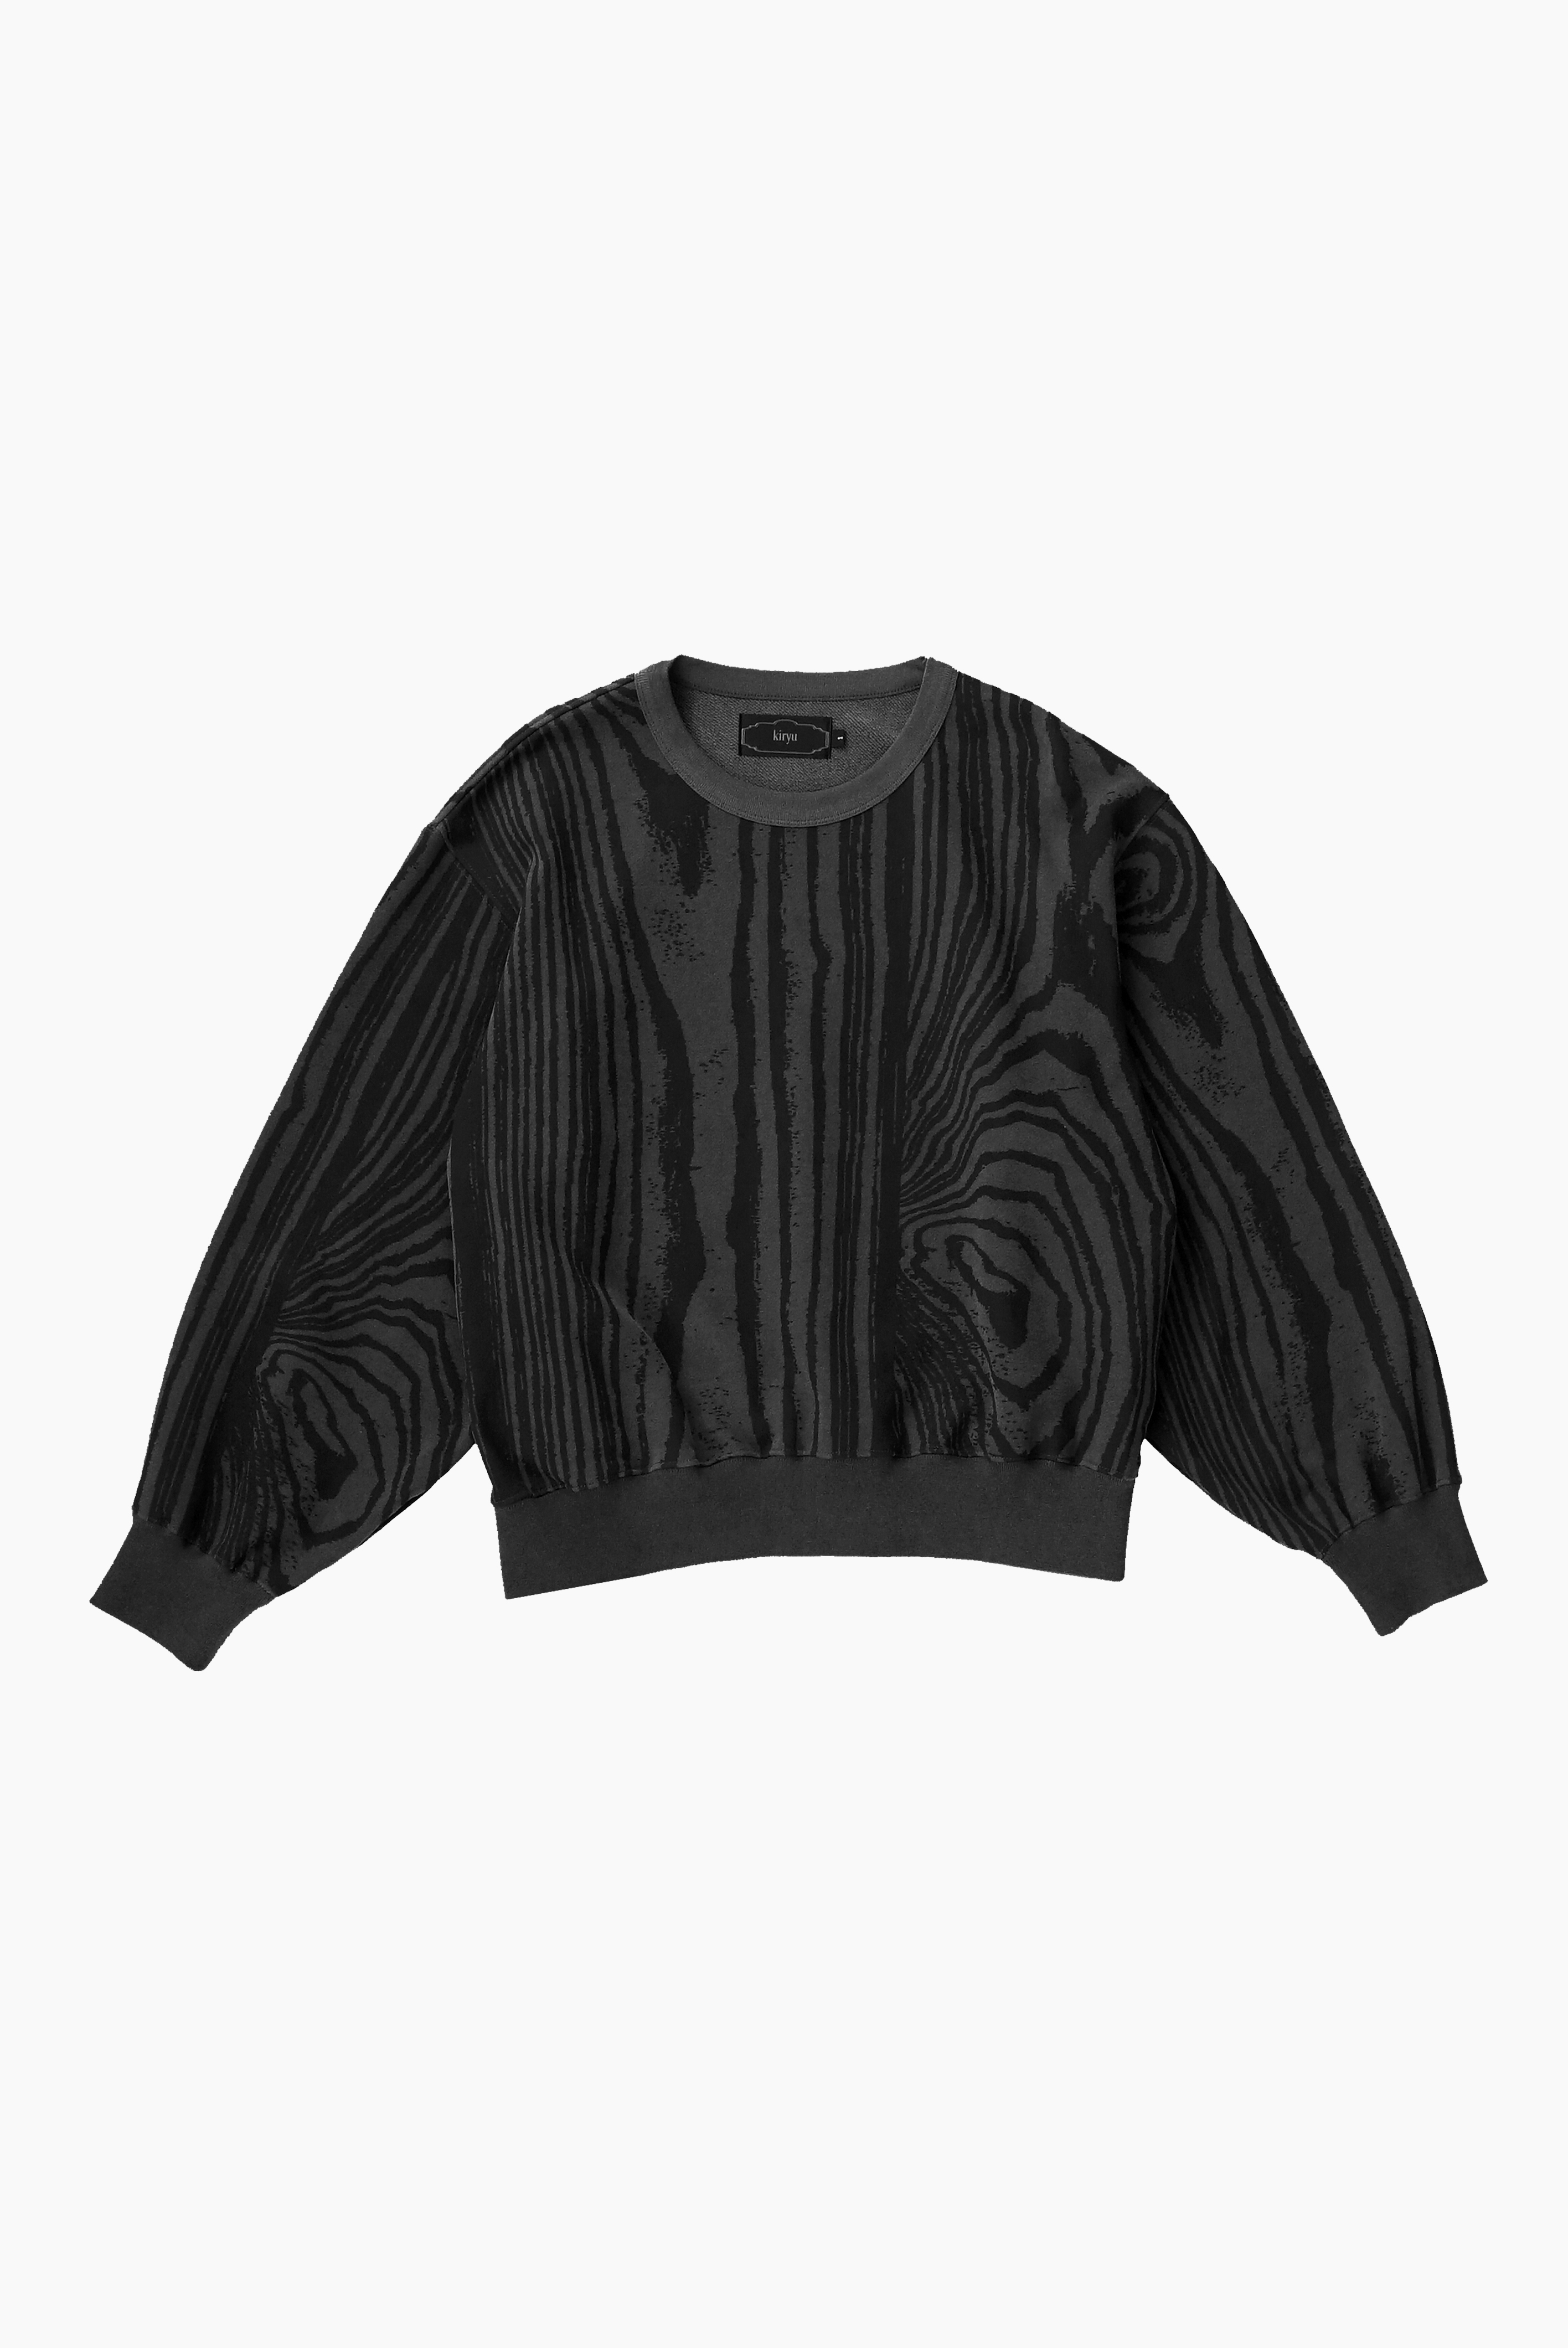 GROWTH RING CREWNECK PULLOVER